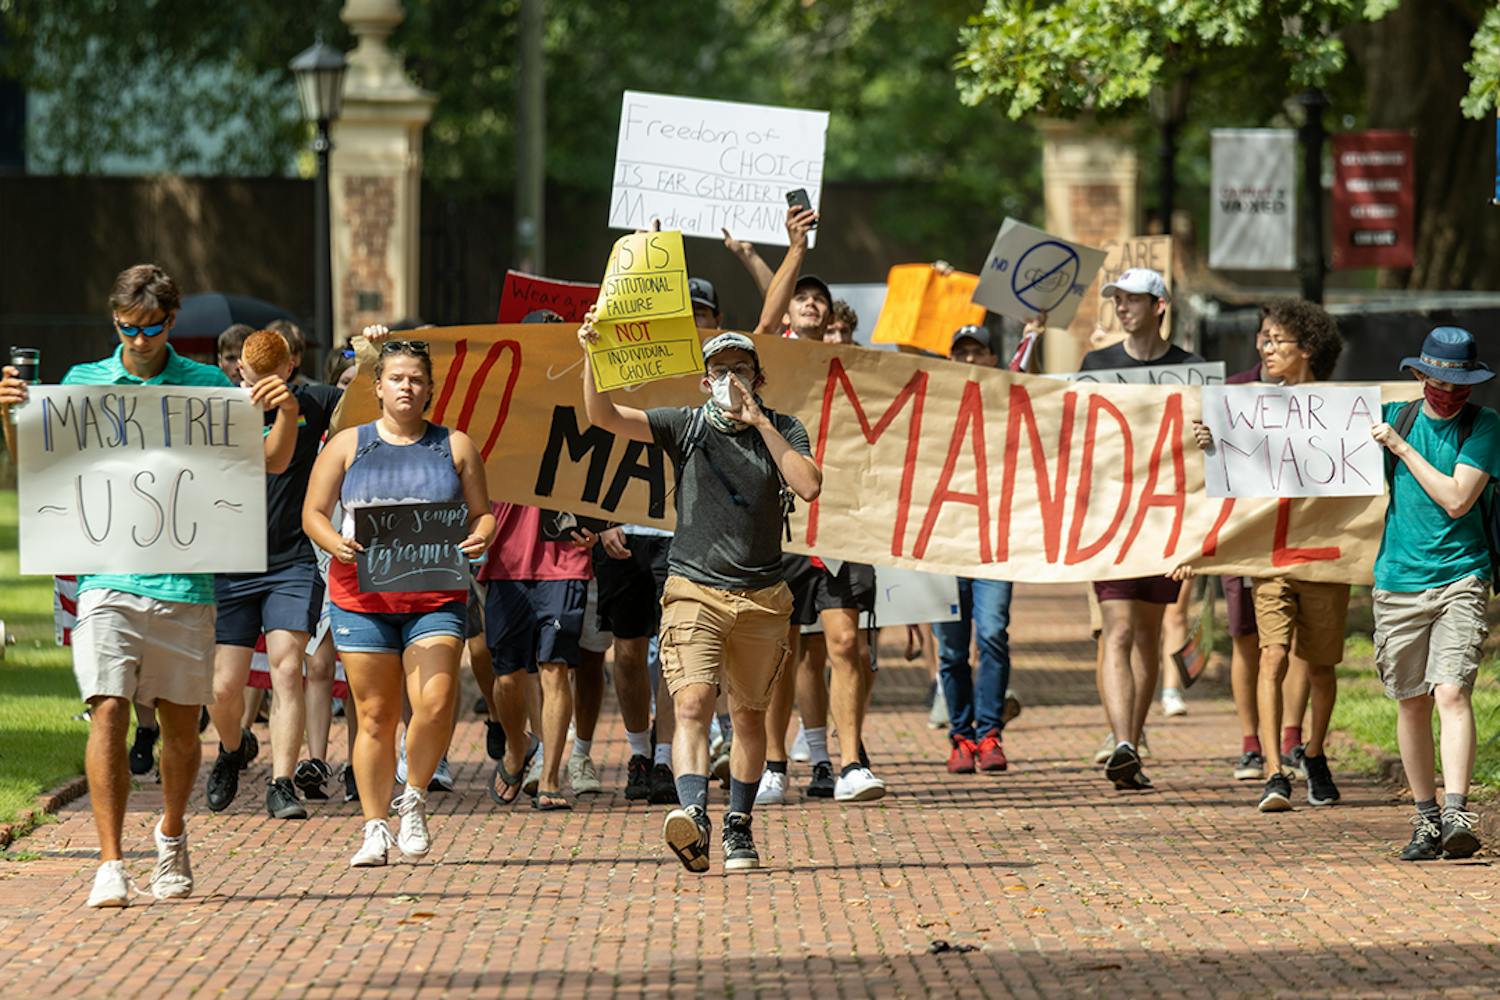 The 鶹С򽴫ý Turning Point USA chapter protests on the Horseshoe over the mask mandate while the Carolina Socialists counterprotest. The mask mandate was put in place by interim university President Harris Pastides on Aug. 18, 2021.